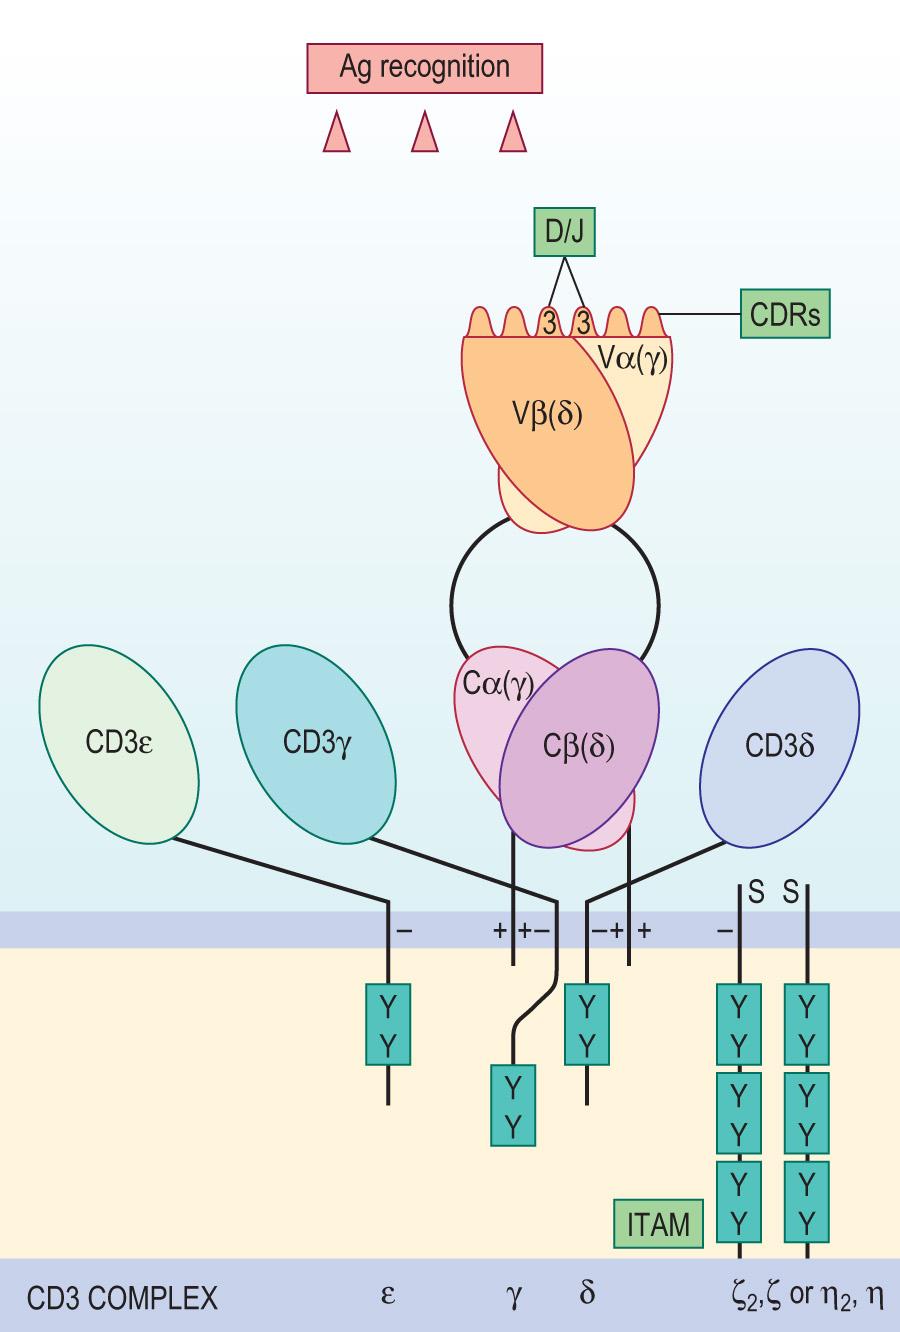 Fig. 6.11, T cell receptor on αβ T cells consists of an α- and a β-chain, each composed of a variable (V) and a constant (C) domain resembling the immunoglobulin Fab antigen-binding fragment in structure.